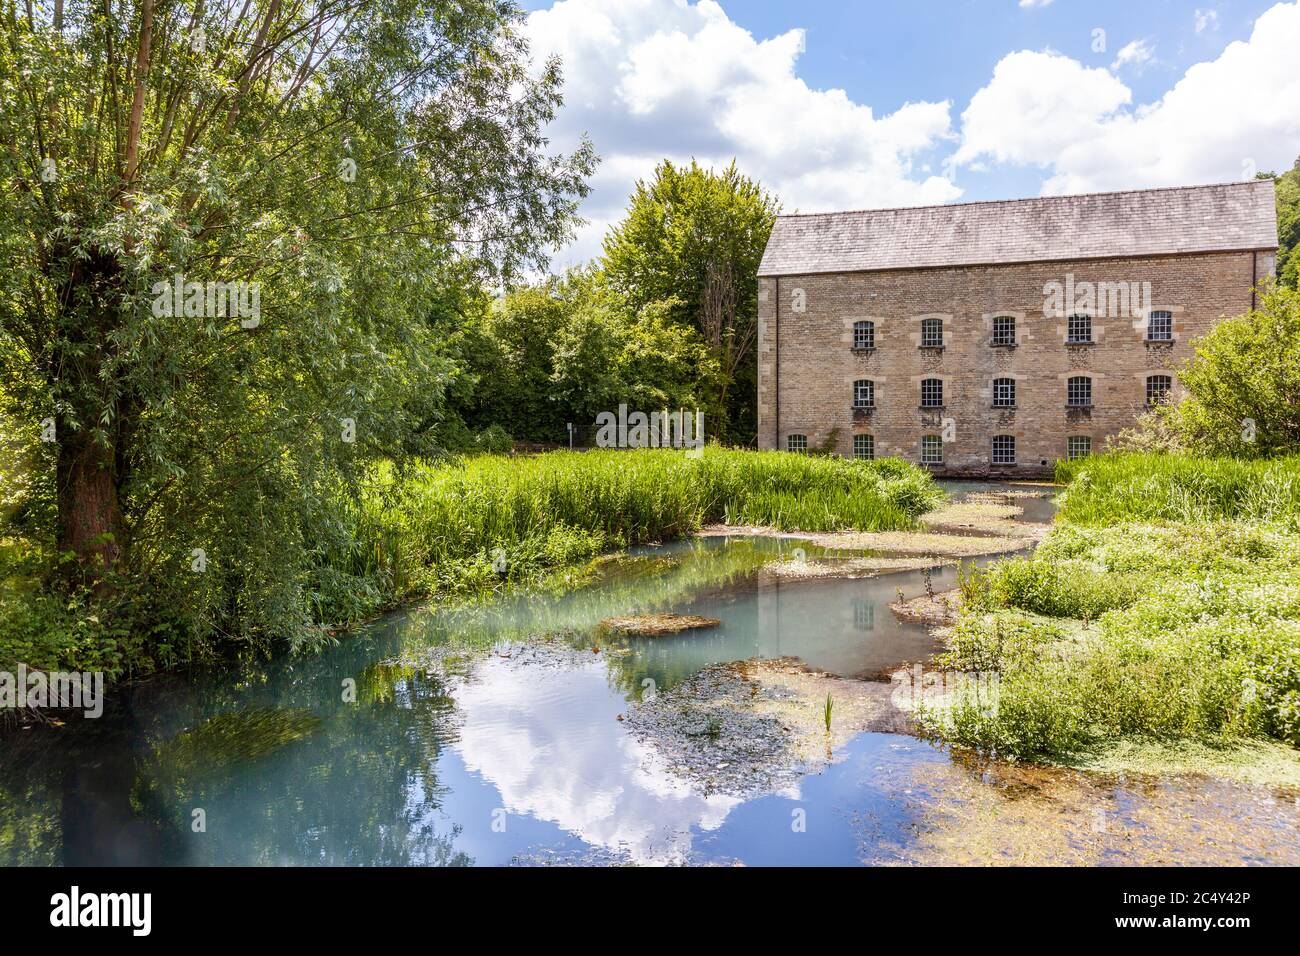 Belvedere Mill (also known as Tayloes Mill) on the River Frome in the Stroud Valleys at Chalford, Gloucestershire UK Stock Photo